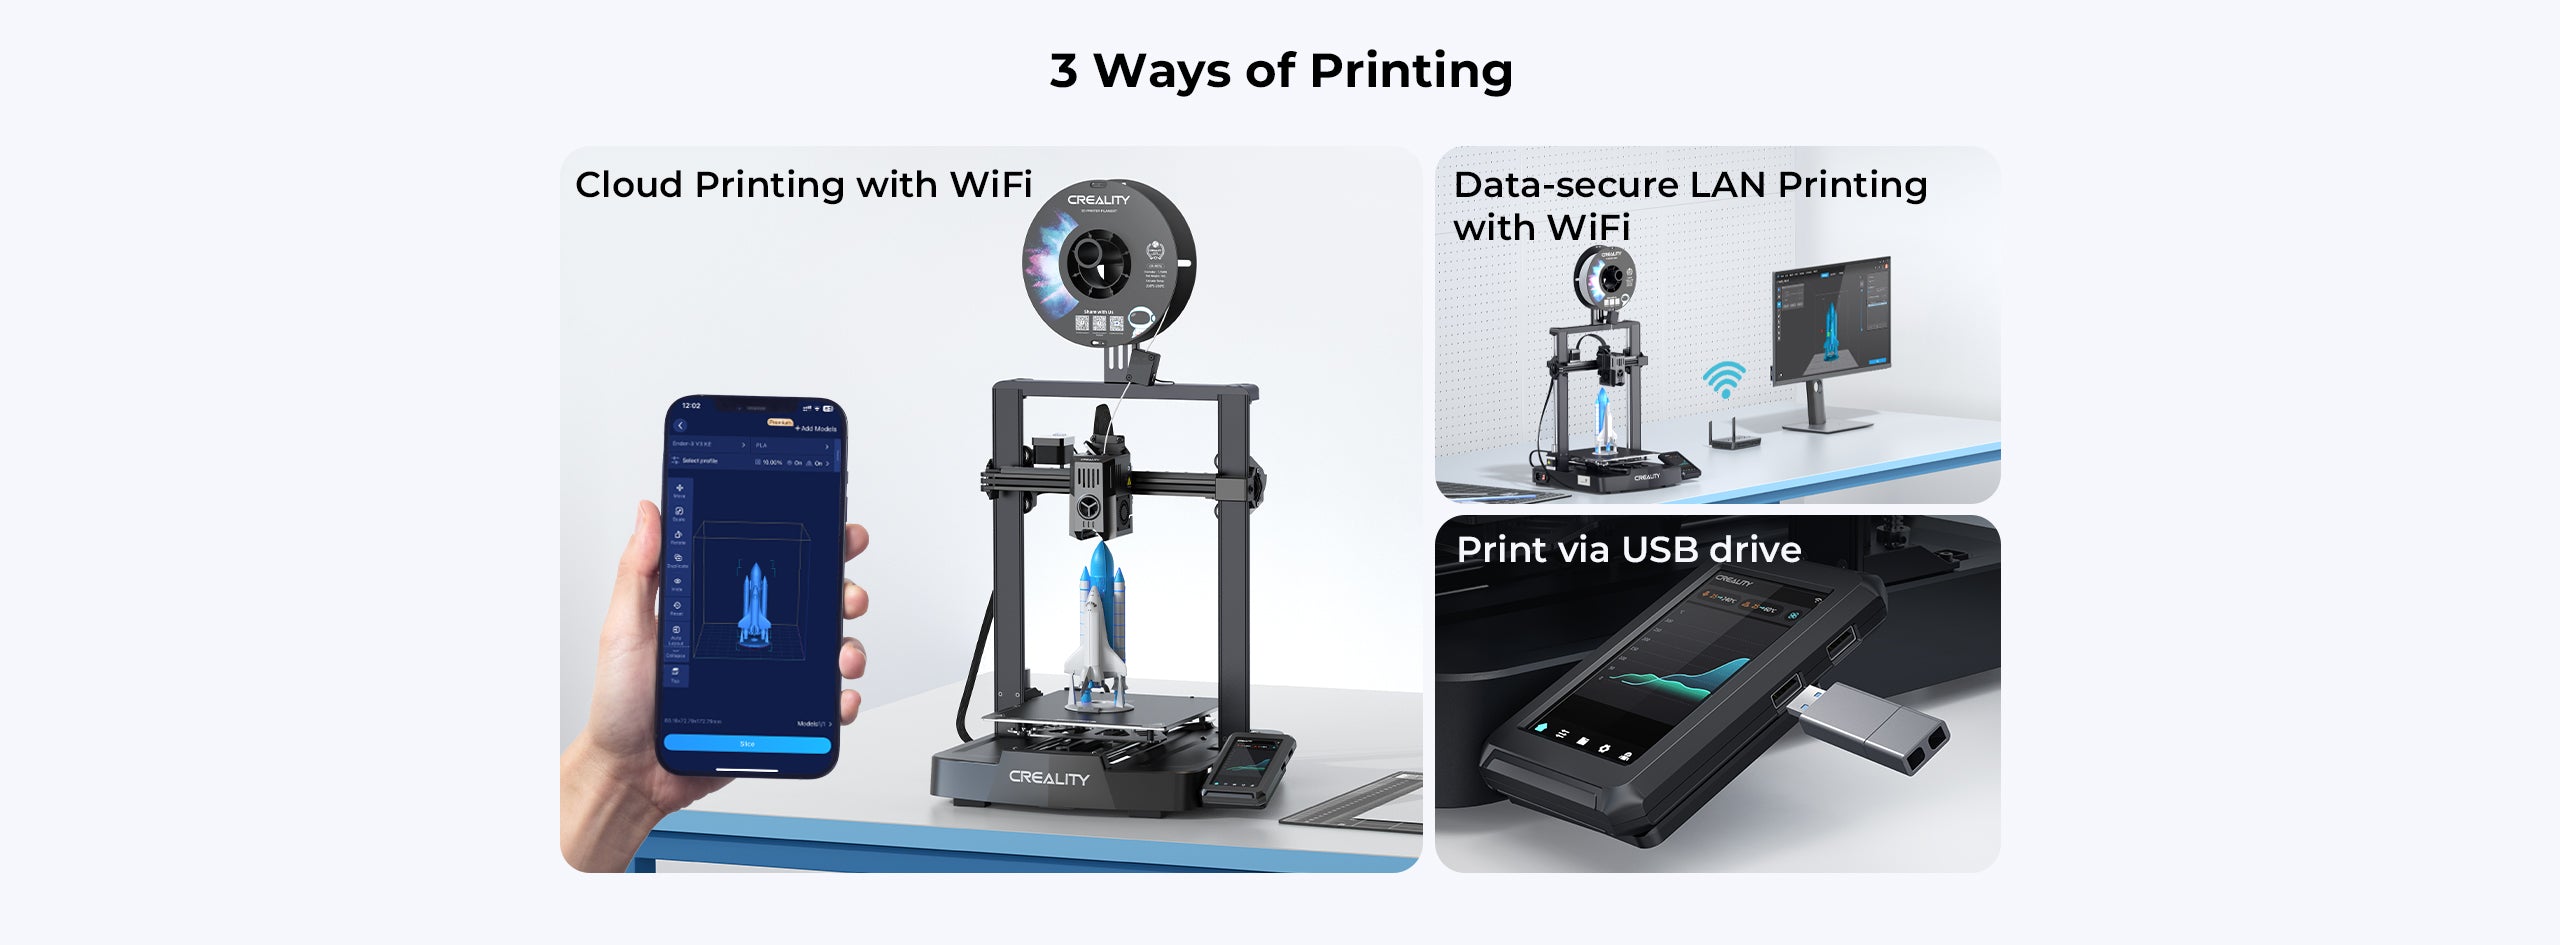 3 ways of 3d printing, could printing with wifi, date-sevure lan printing with wifi, print via USB drive